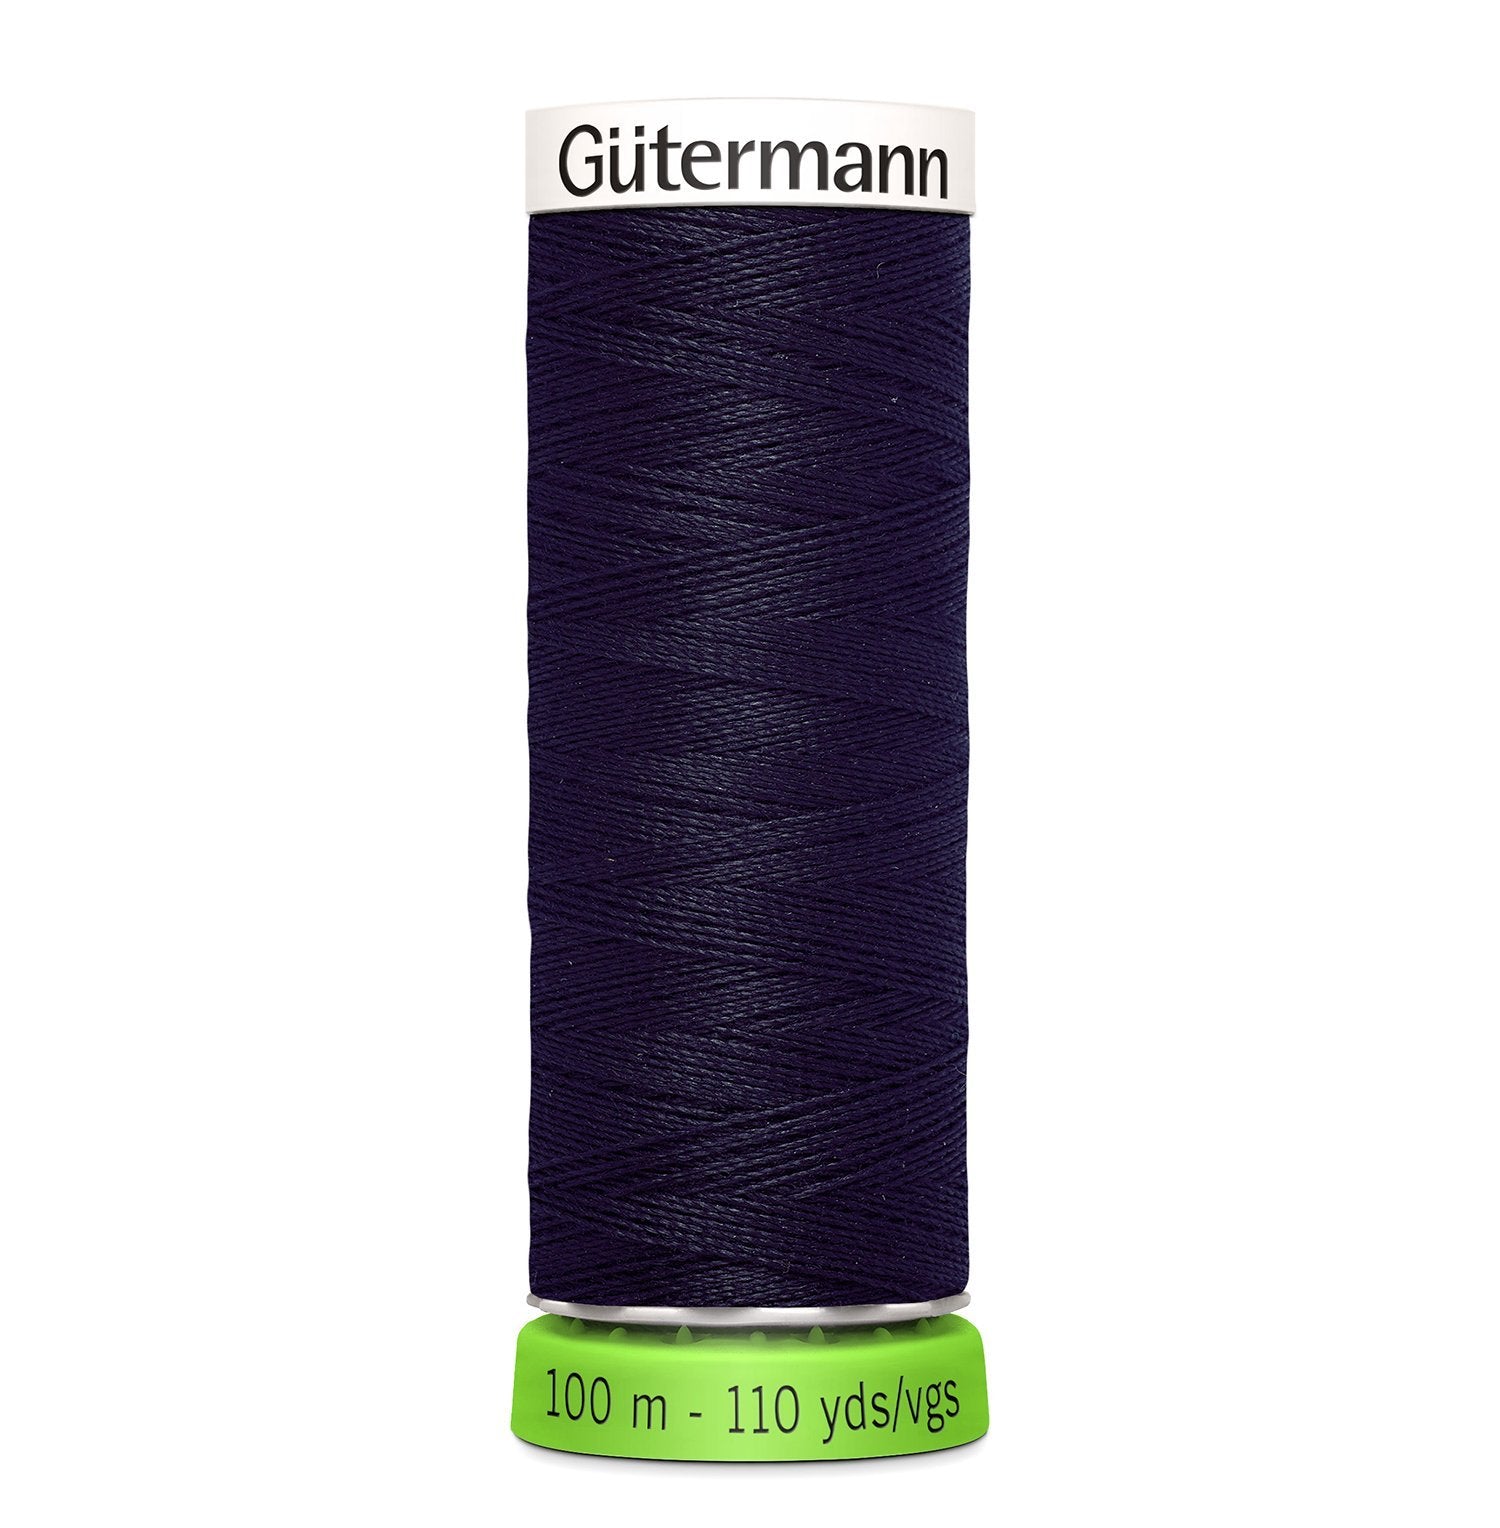 Gutermann Recycled Thread 100m, Colour 665 from Jaycotts Sewing Supplies